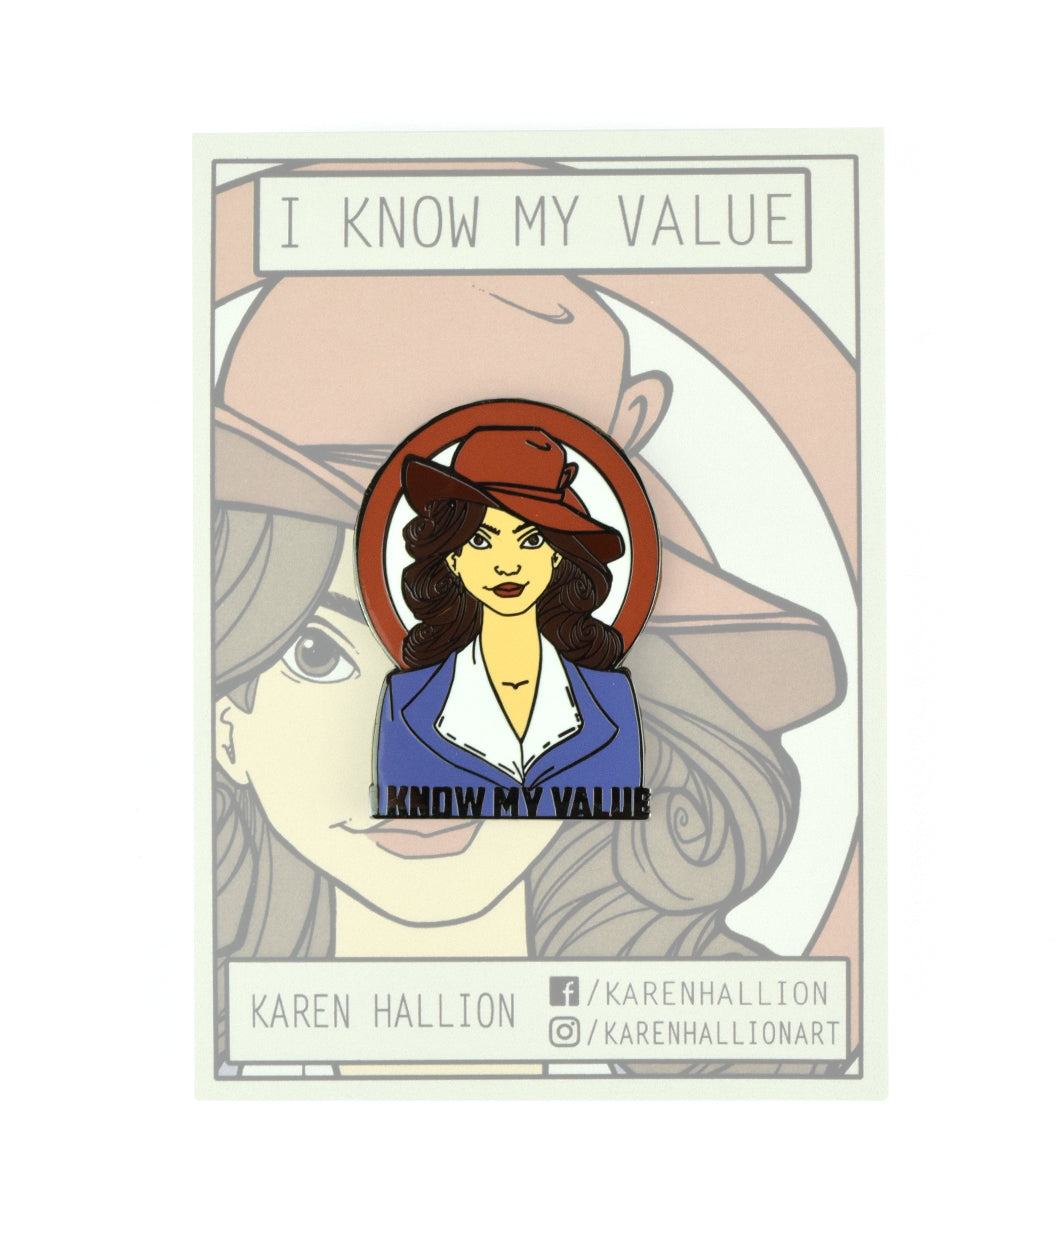 A pin of a woman wearing a suit top and a red hat staring ahead. Black font on the pin reads "I Know My Value". From Karen Hallion.